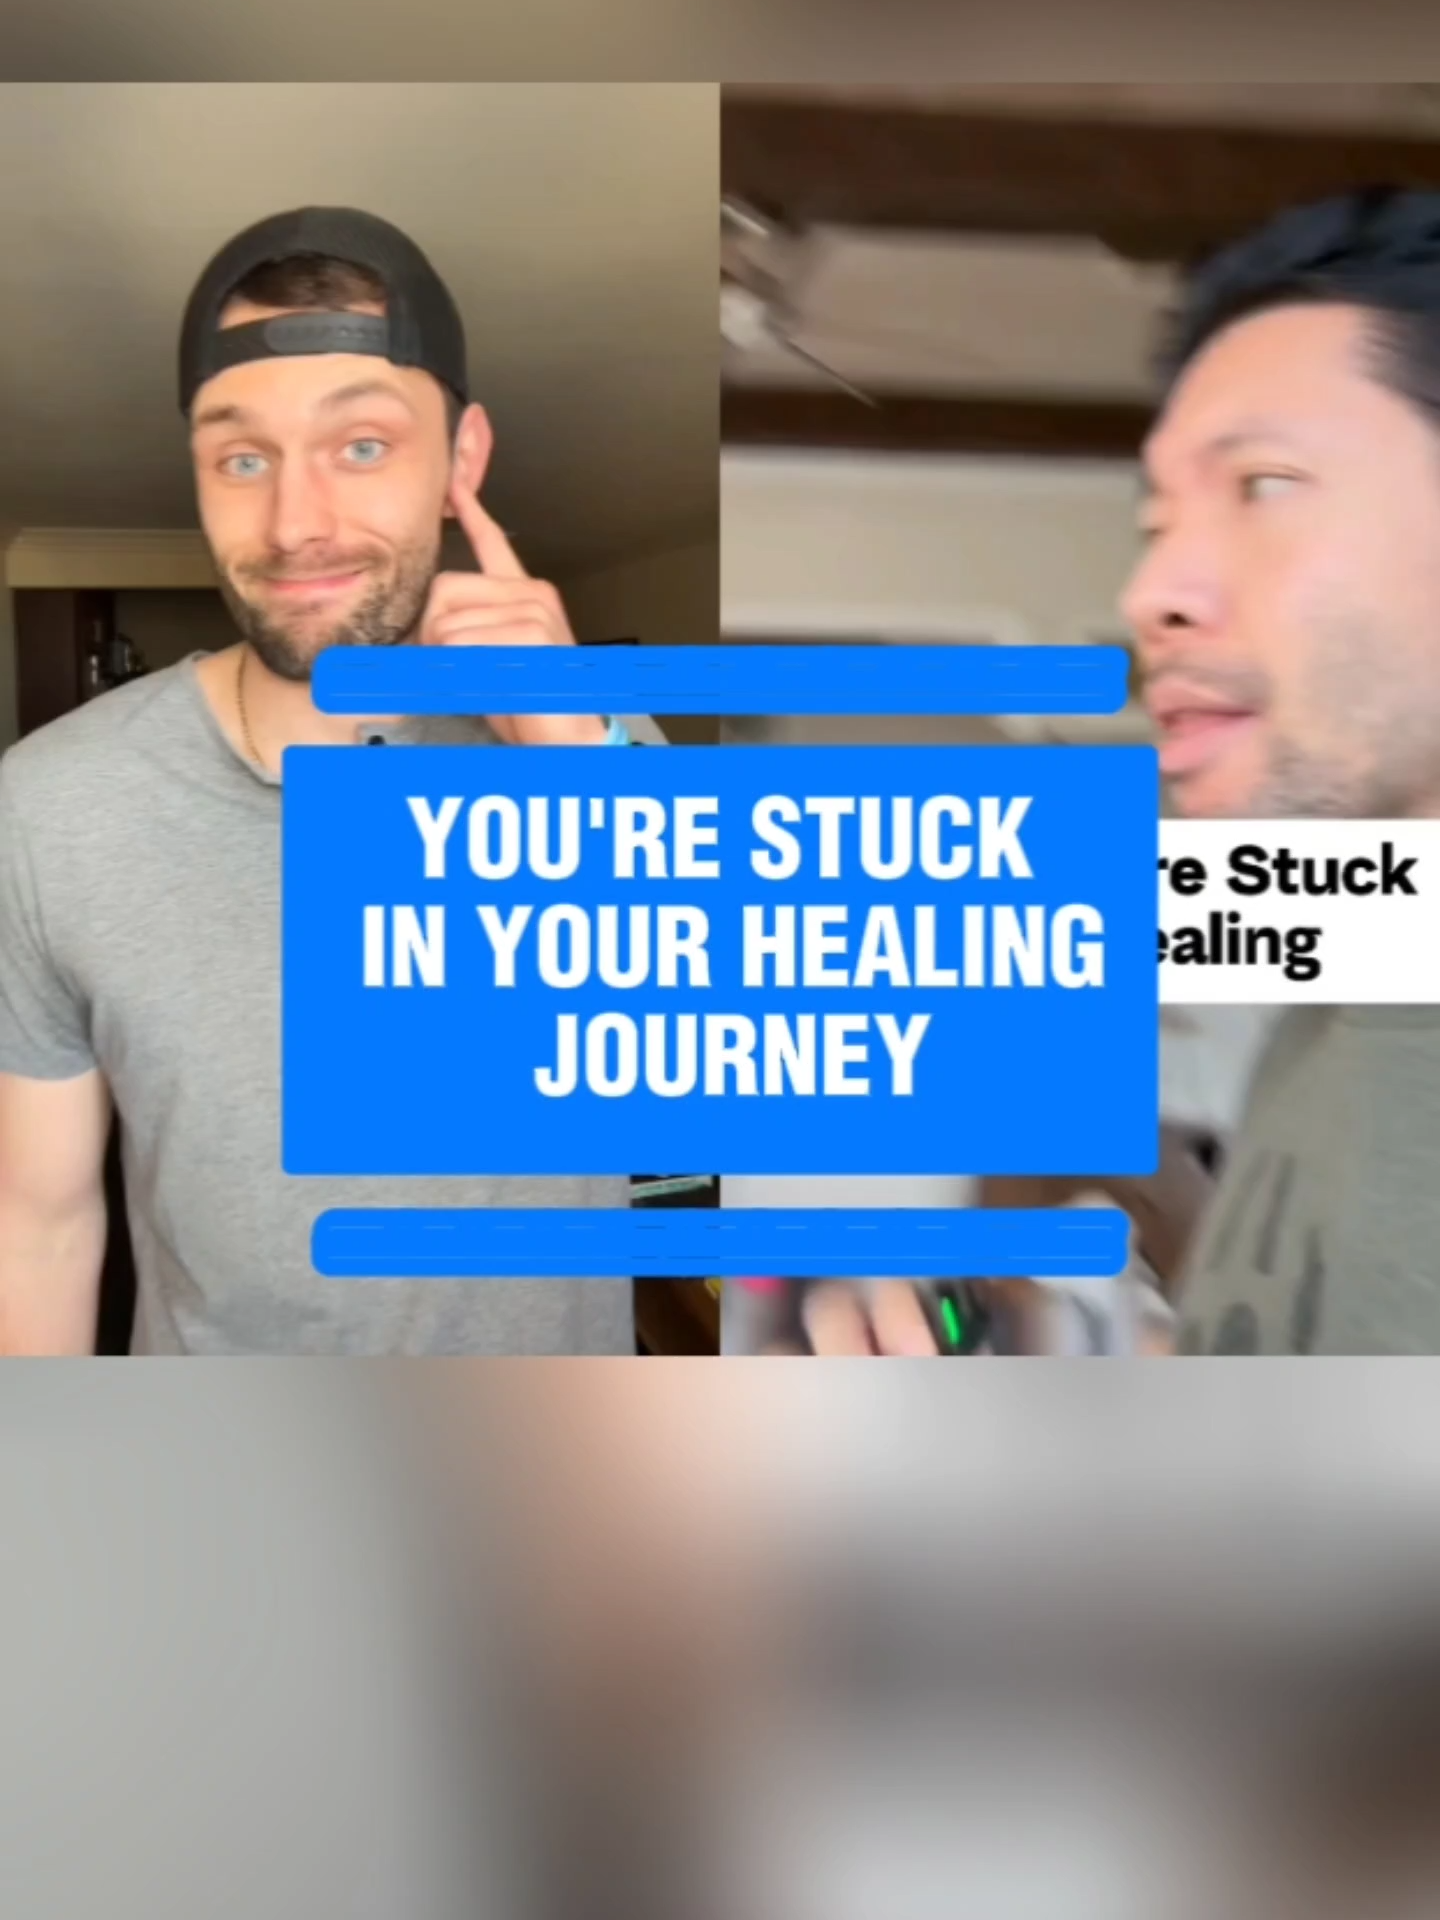 You're Stuck in Your Healing Journey These are three signs that indicate being stuck in the first phase of a three-phase healing journey: 1. Intellectualizing Healing: Despite understanding traumas and behaviors intellectually, perhaps through reading, videos, or therapy, there's no real change. When entering relationships, old pains and insecurities resurface, showing that knowledge hasn't translated into emotional healing. 2. Spiritual Bypassing: Engaging in activities like yoga, meditation, and affirmations, while maintaining a facade of positivity and self-acceptance. However, when triggered by close people, there's a regression to a hurt, child-like state, indicating a lack of true emotional processing and acceptance. 3. Avoiding Painful Feelings: Often unconscious, this involves staying constantly busy or preoccupied as a way to avoid confronting inner feelings. It might appear as productivity, but it's actually a form of self-avoidance. The author emphasizes that true healing and transformation require dropping these protective mechanisms of the ego. This involves facing and connecting with root fears and pains that still exert control, through methods like somatic work, inner child work, and repeatedly doing the opposite of what the ego and fear dictate. The author shares this from personal experience, having made these mistakes themselves. CTO: @awakeningwithbrian (IG) . . . . . . . . #neuroscience  #HealingJourney  #MentalHealth  #transformation  #conquerfear  #selfavoidance  #healing  #mental  #spiritual  #emotional  #feelings  #mindbrainbodylab  #codyisabel